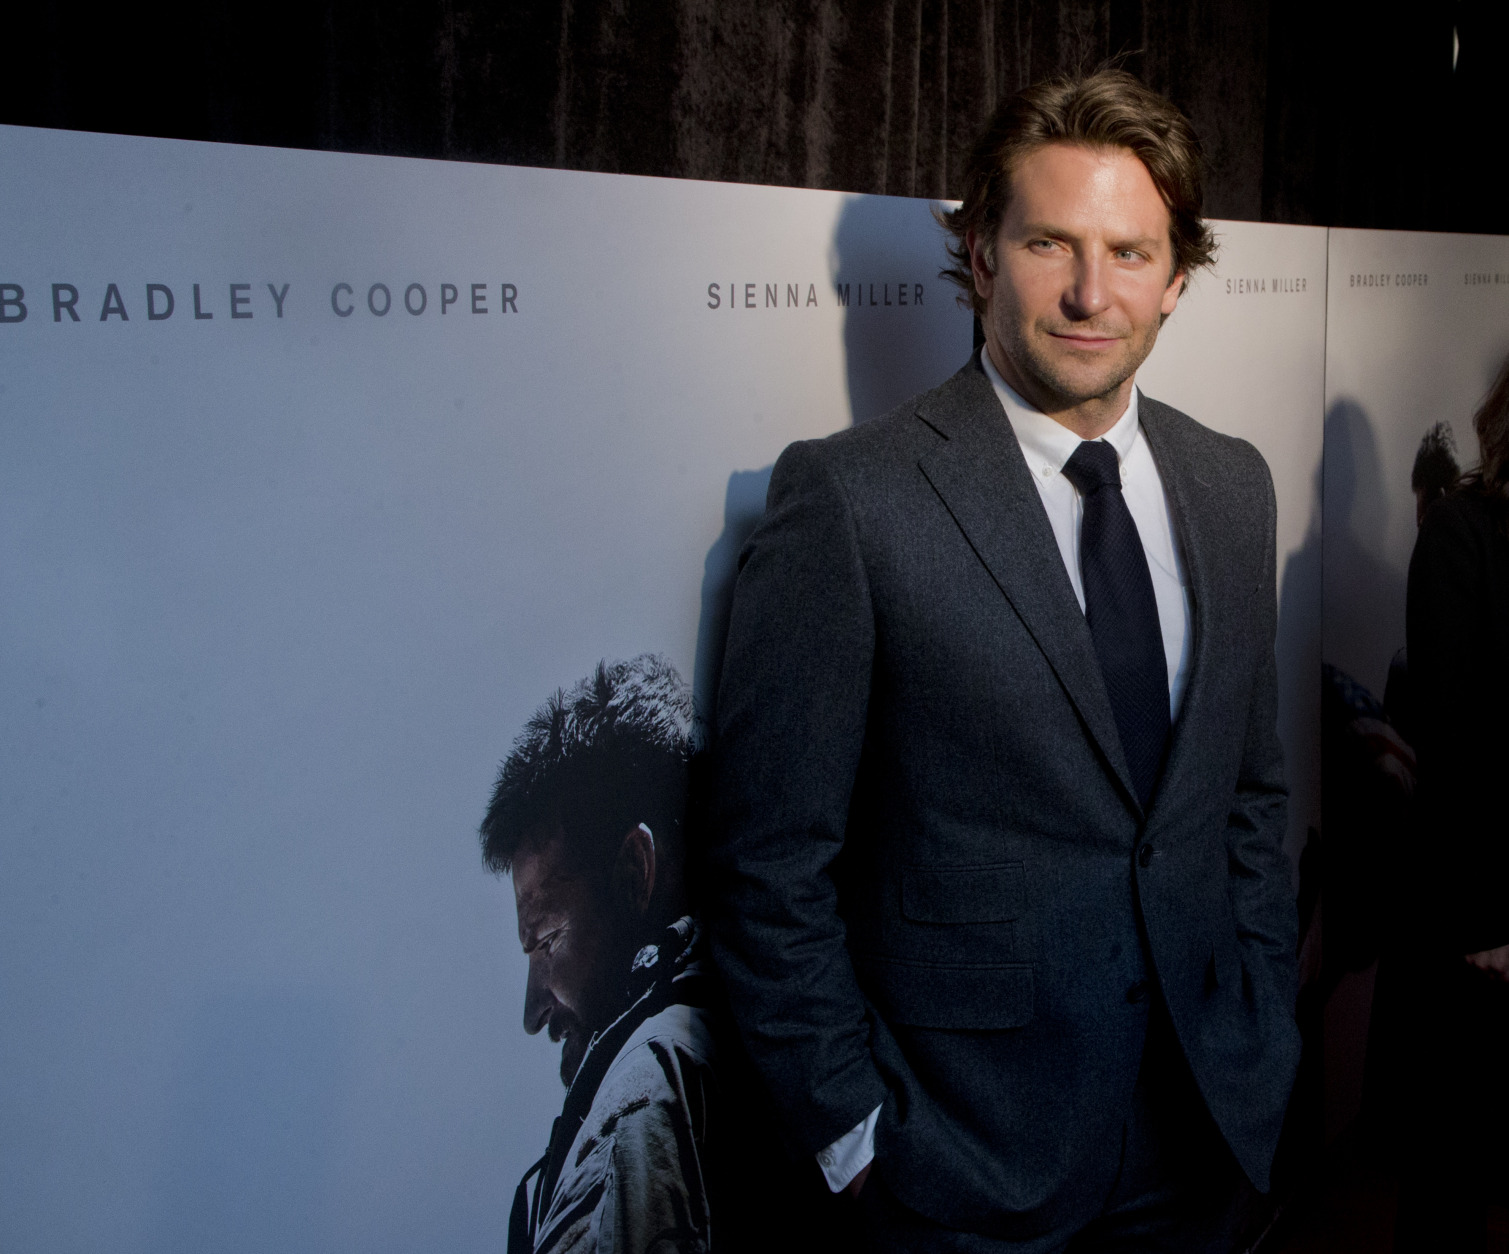 Actor Bradley Cooper arrives at the Washington premiere of the movie American Sniper at Burke Theatre at the U.S. Navy Memorial in Washington, Tuesday, Jan. 13, 2015. Cooper played US Navy SEAL Chris Kyle, the deadliest sniper in American military history and author of the book American Sniper," made into a movie with the same title.  (AP Photo/Manuel Balce Ceneta)